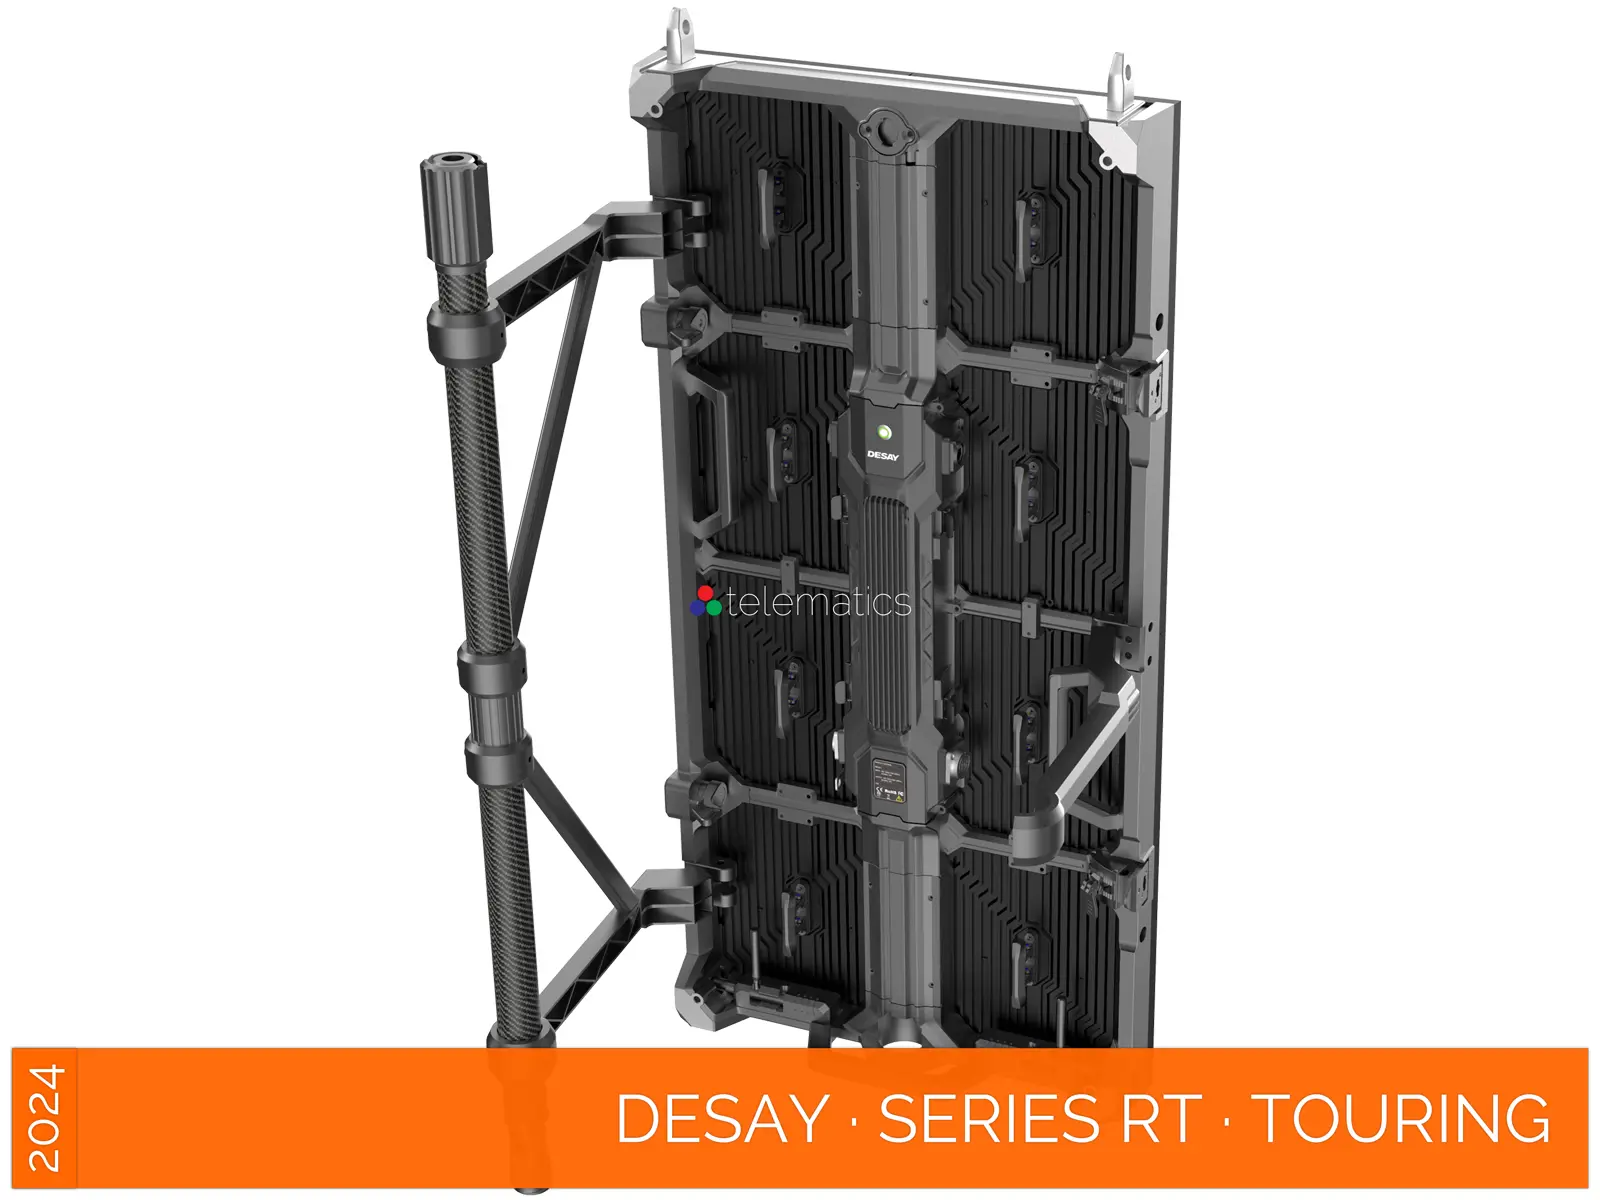 Desay · Series RT · Direct View LED Display Panel · Full Pixel Range · Rental Or Touring · Outdoor Rated · Rapid Service And Setup · Touring Rigging For Quick Setup And Tear Down · NovaStar COEX MX CX · Vision Management Platform · Viplex · review · price · cost · priced from $1,790 per square meter